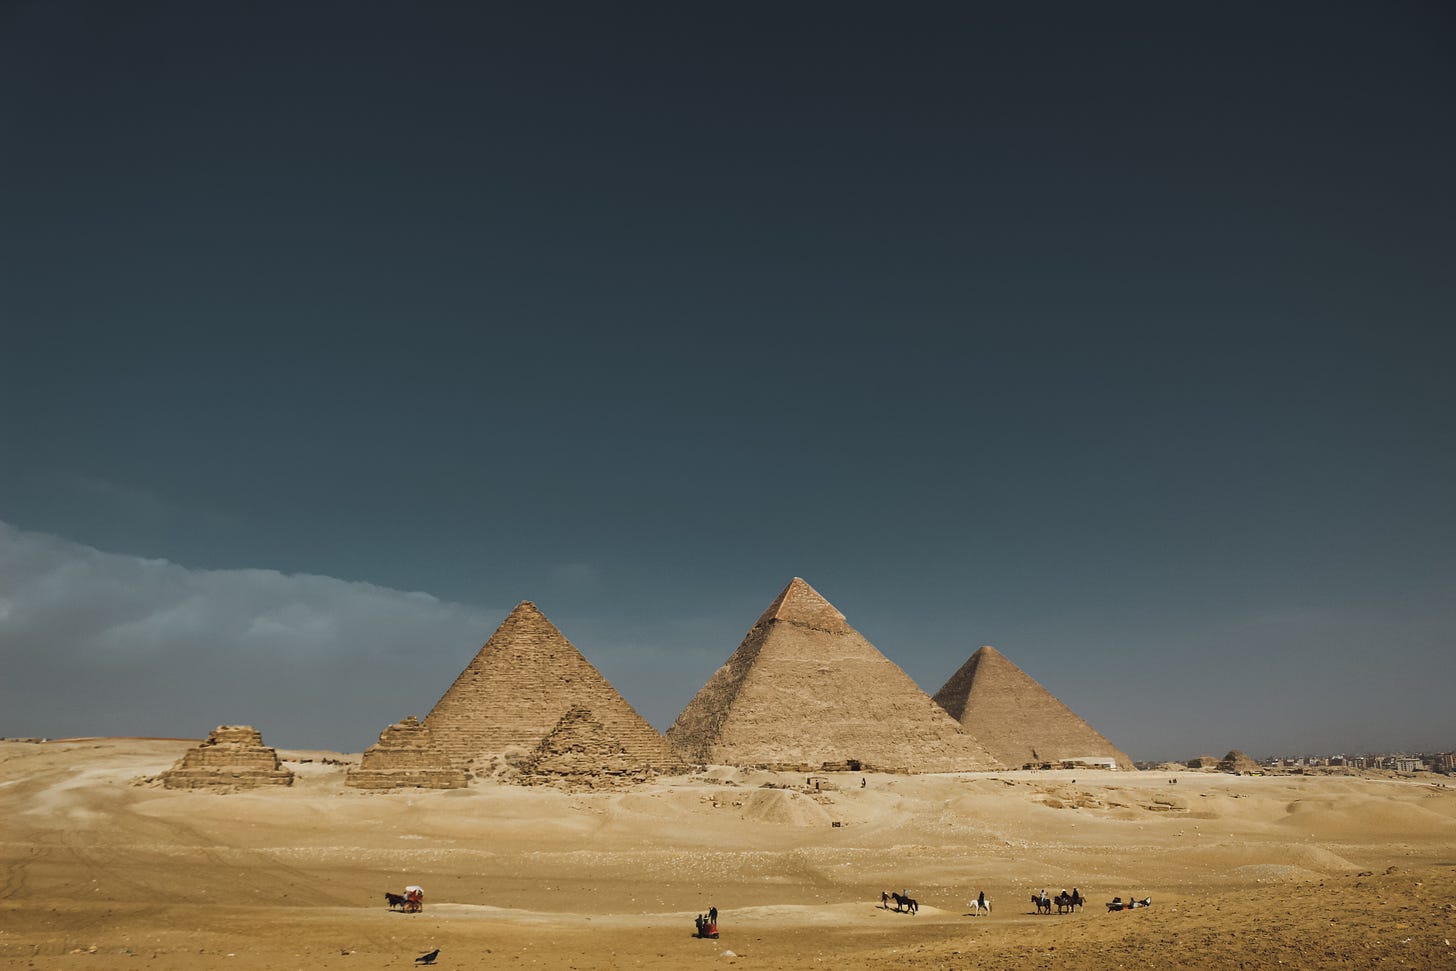 pyramids in Egypt, Africa